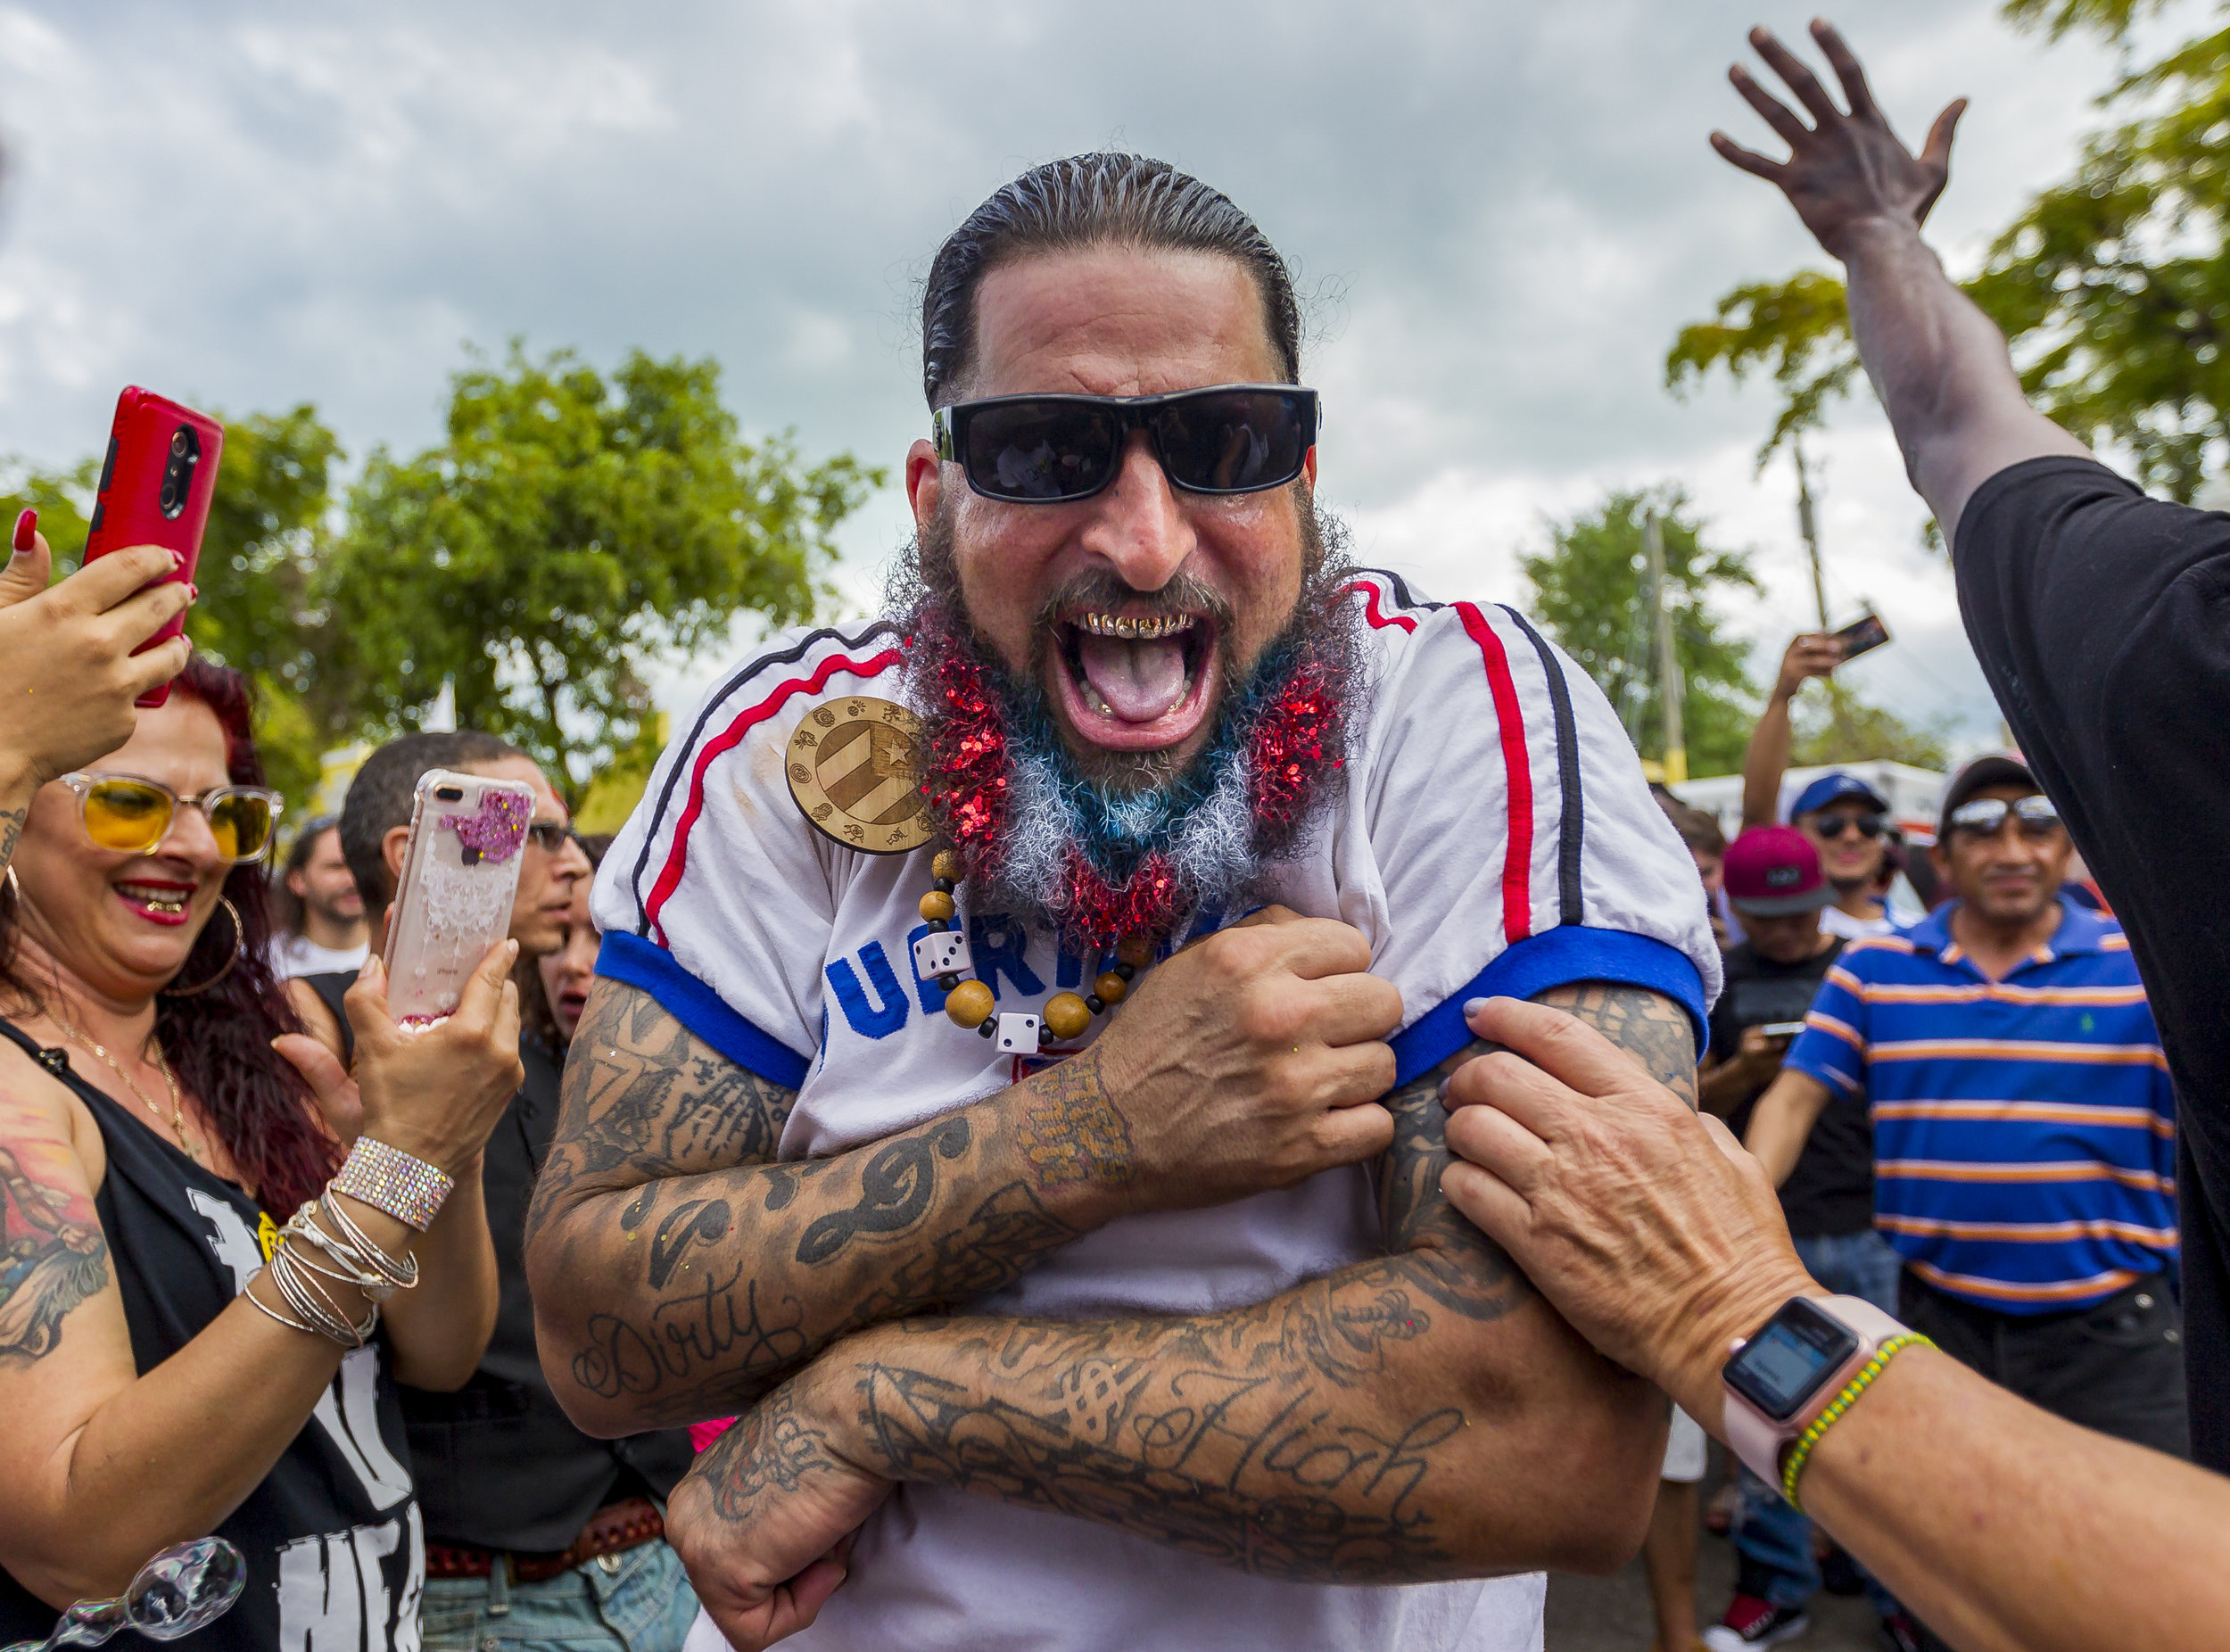  Vince Colon dances in the middle of a crowd during the Carnival Miami Calle Ocho festival in Little Havana on Sunday, March 11, 2018. 